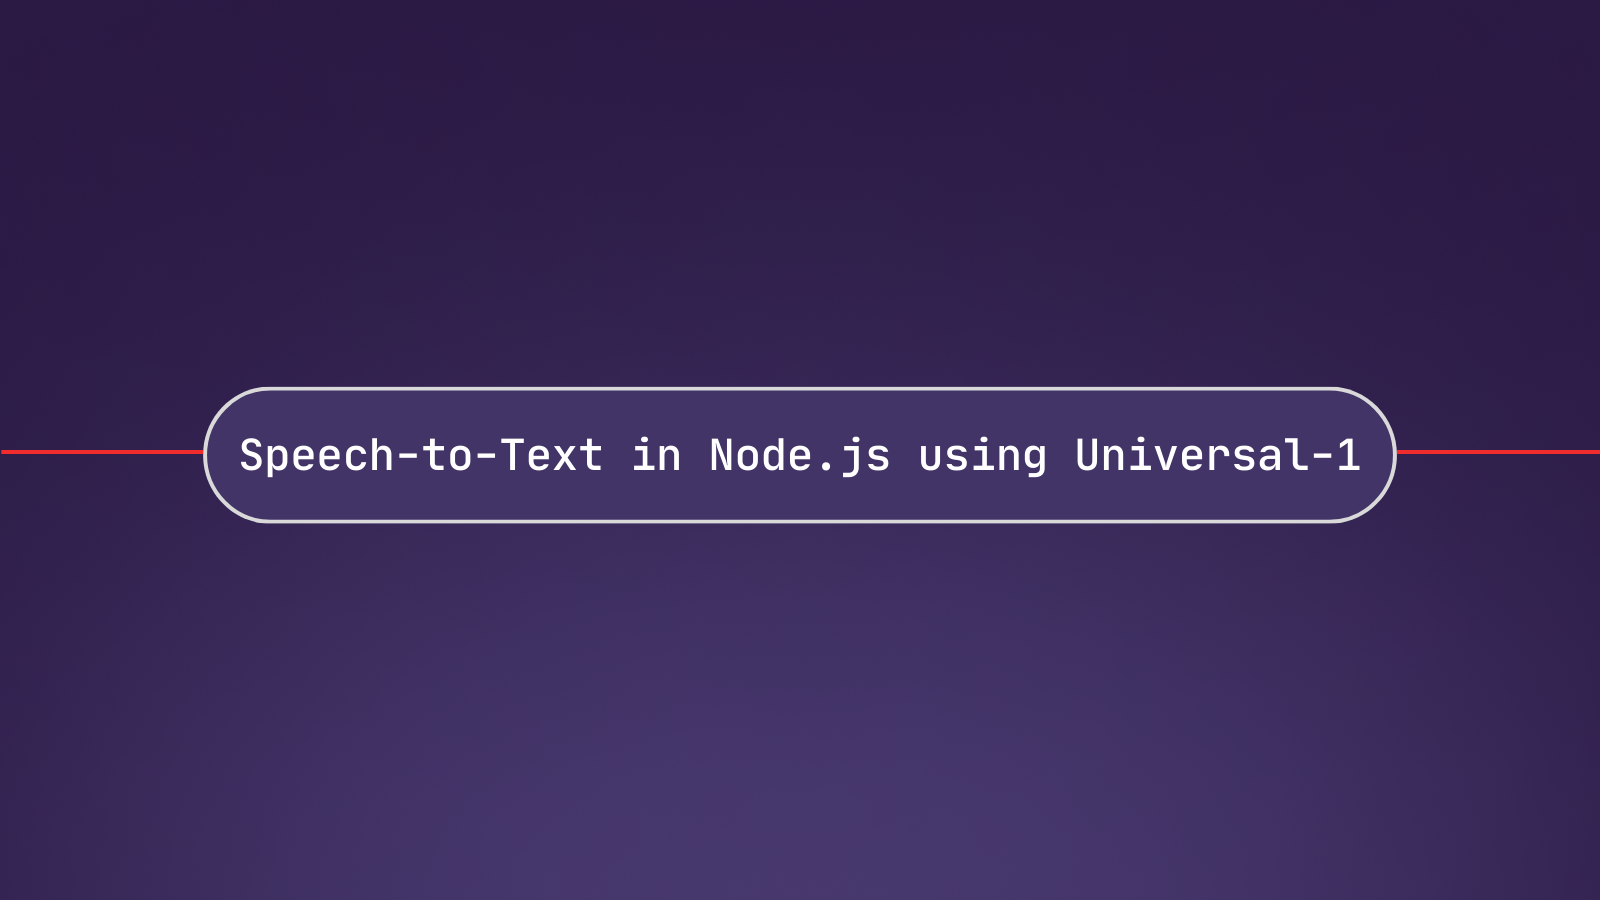 Transcribe an audio file with Universal-1 in Node.js